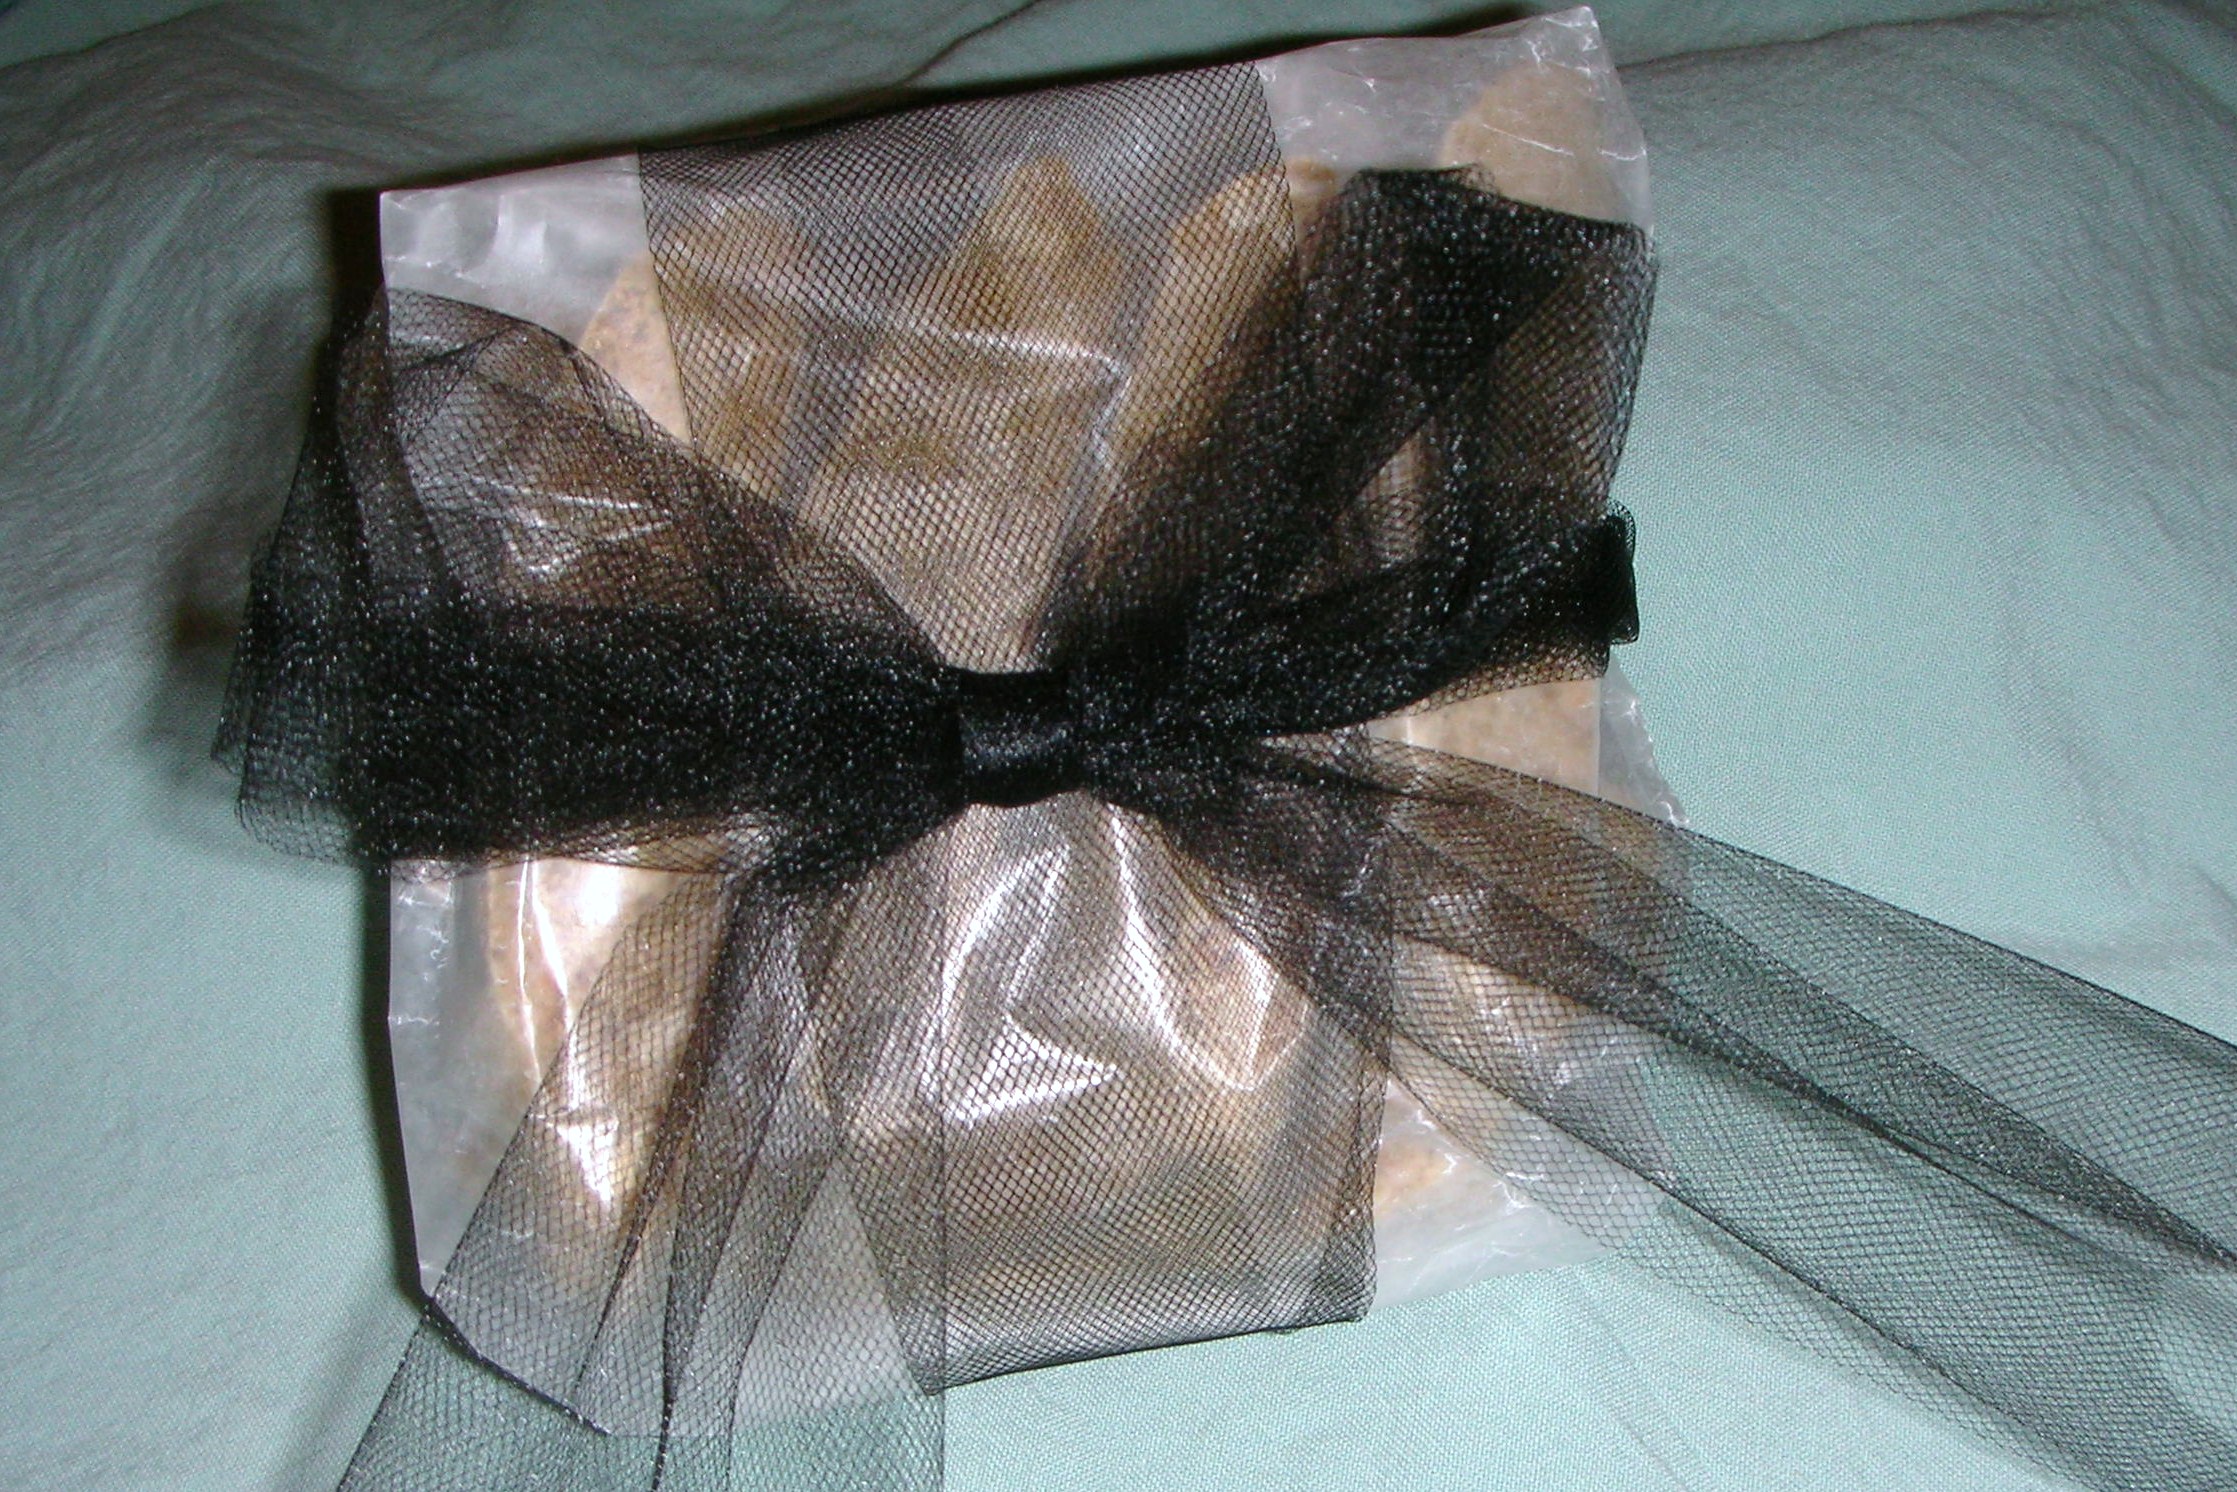 Tuscan almond biscotti, wrapped